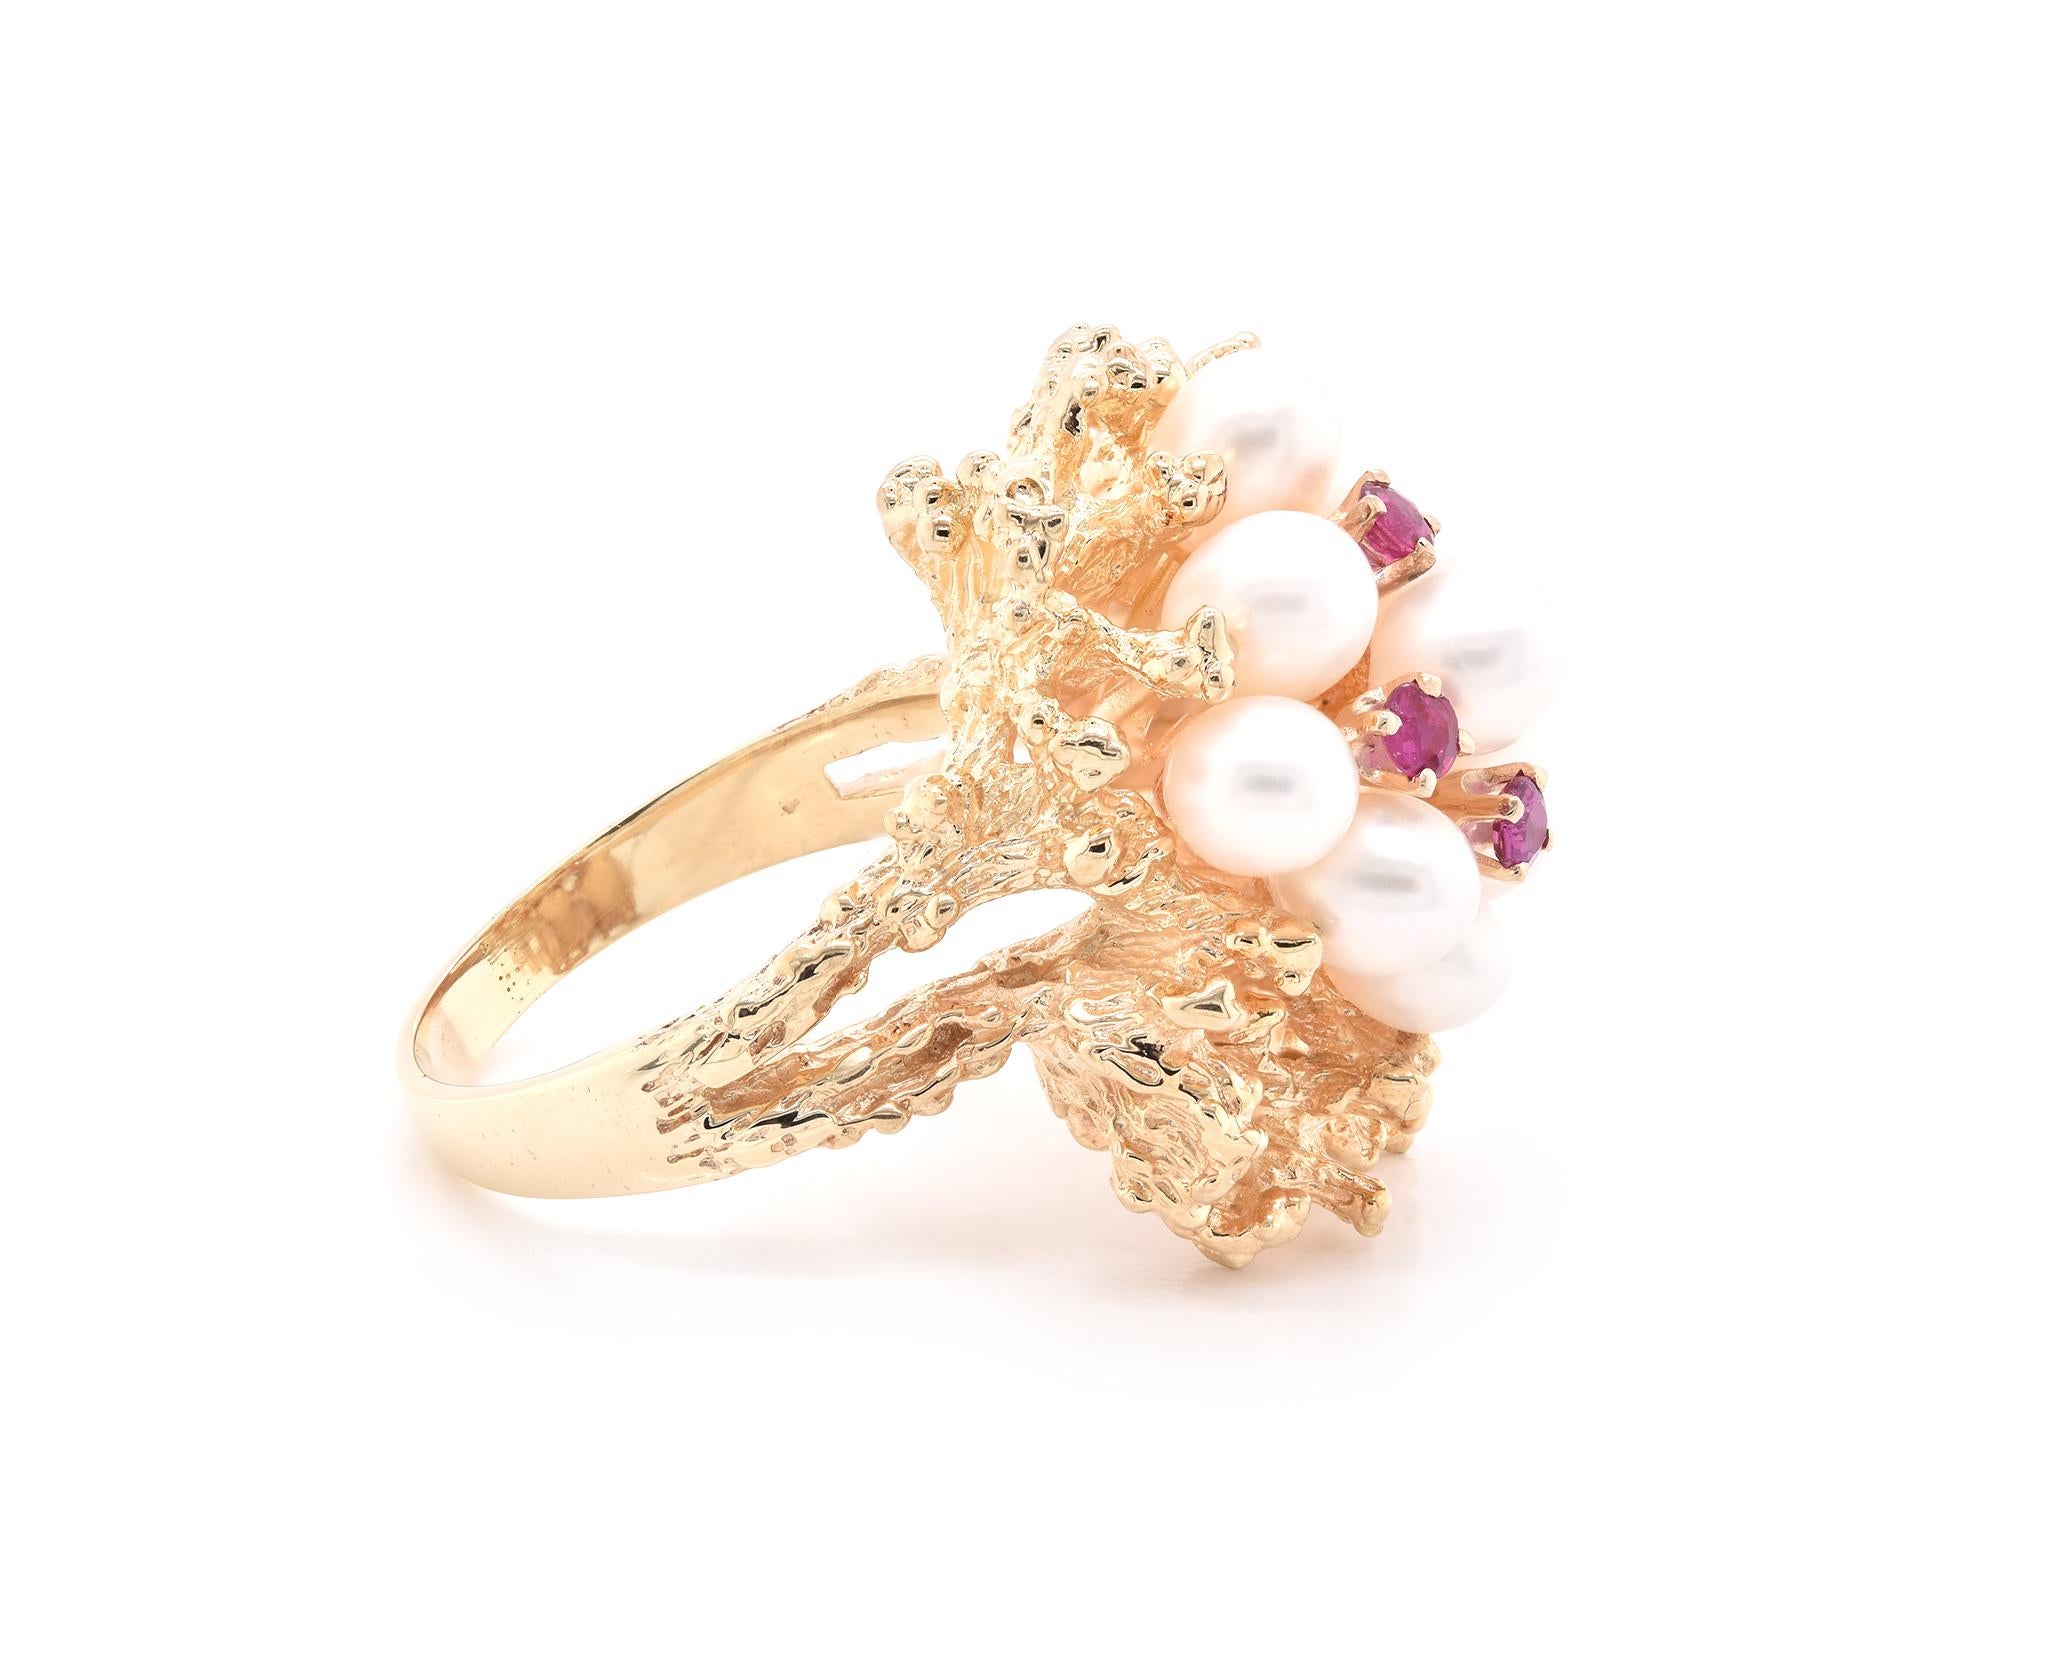 Designer: custom design
Material: 14K yellow gold
Dimensions: ring top measures 25mm wide
Ring Size: 8 (please allow two extra shipping days for sizing requests) 
Weight: 14.47 grams
